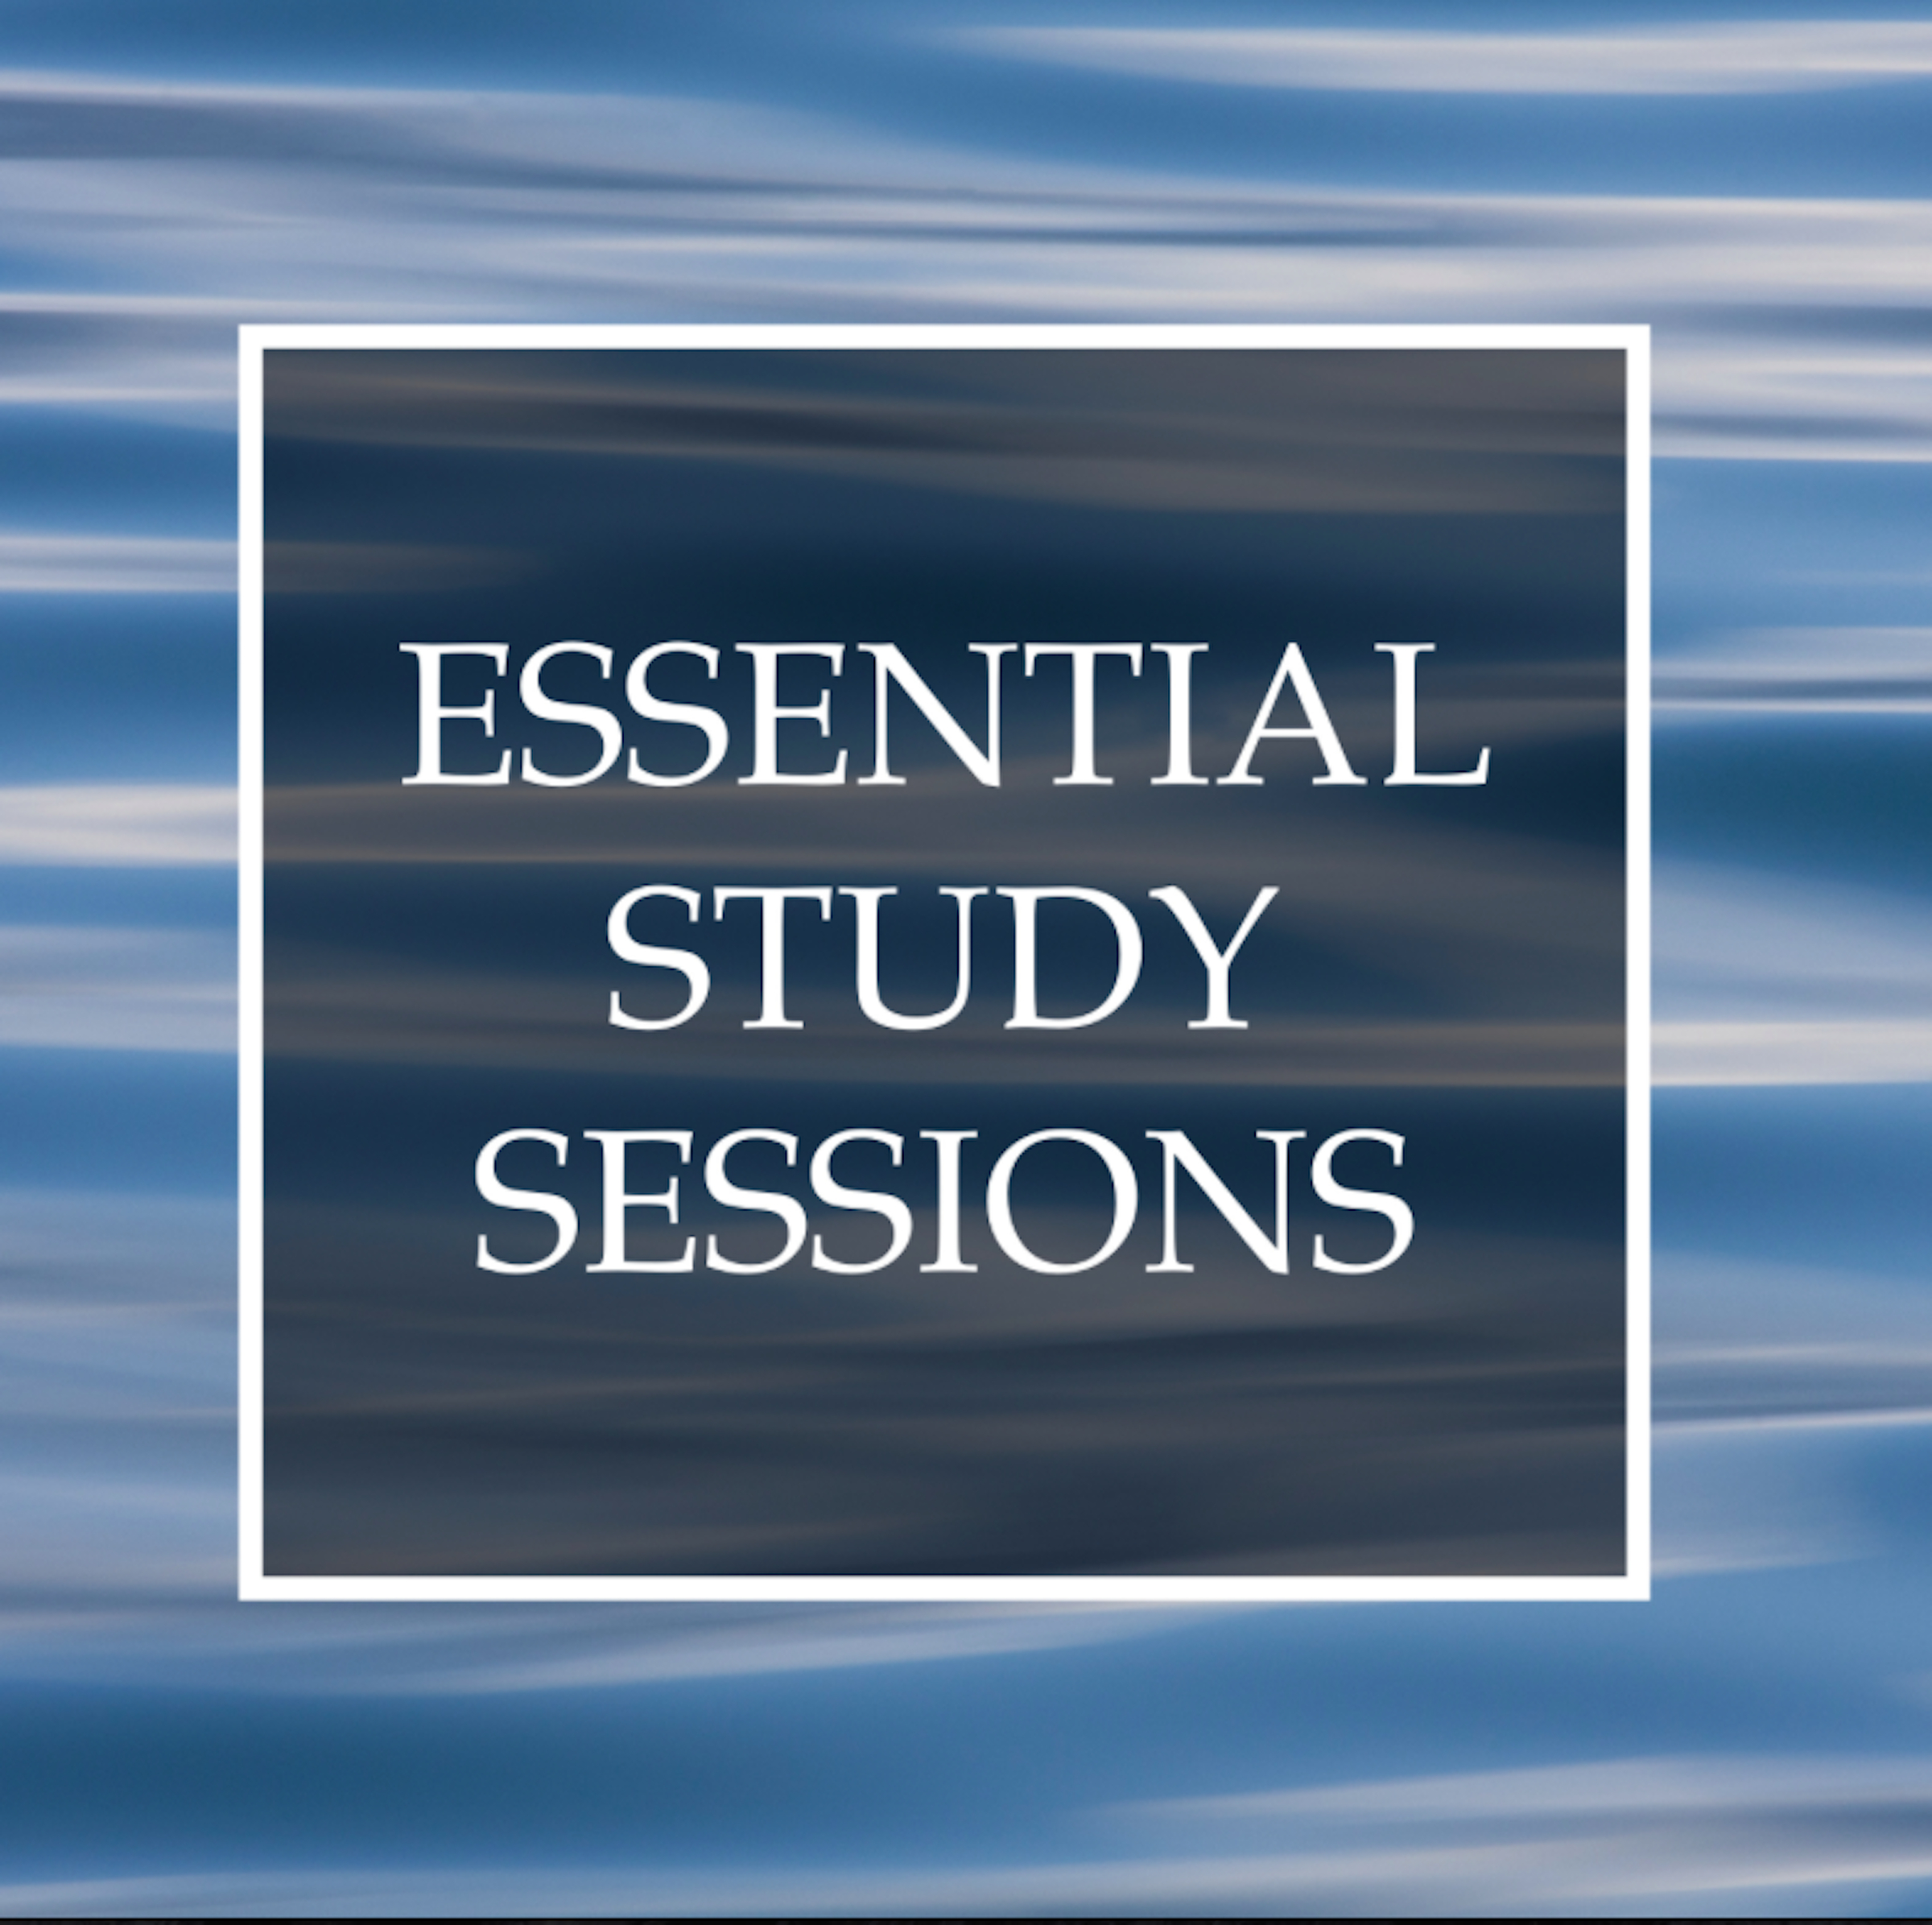 Essential Study Sessions - 20 Engaging Water, Ocean and Rain Sound Melodies for Deep Focus, Creativity, Relaxation and Stress-Free Exam & Study Success